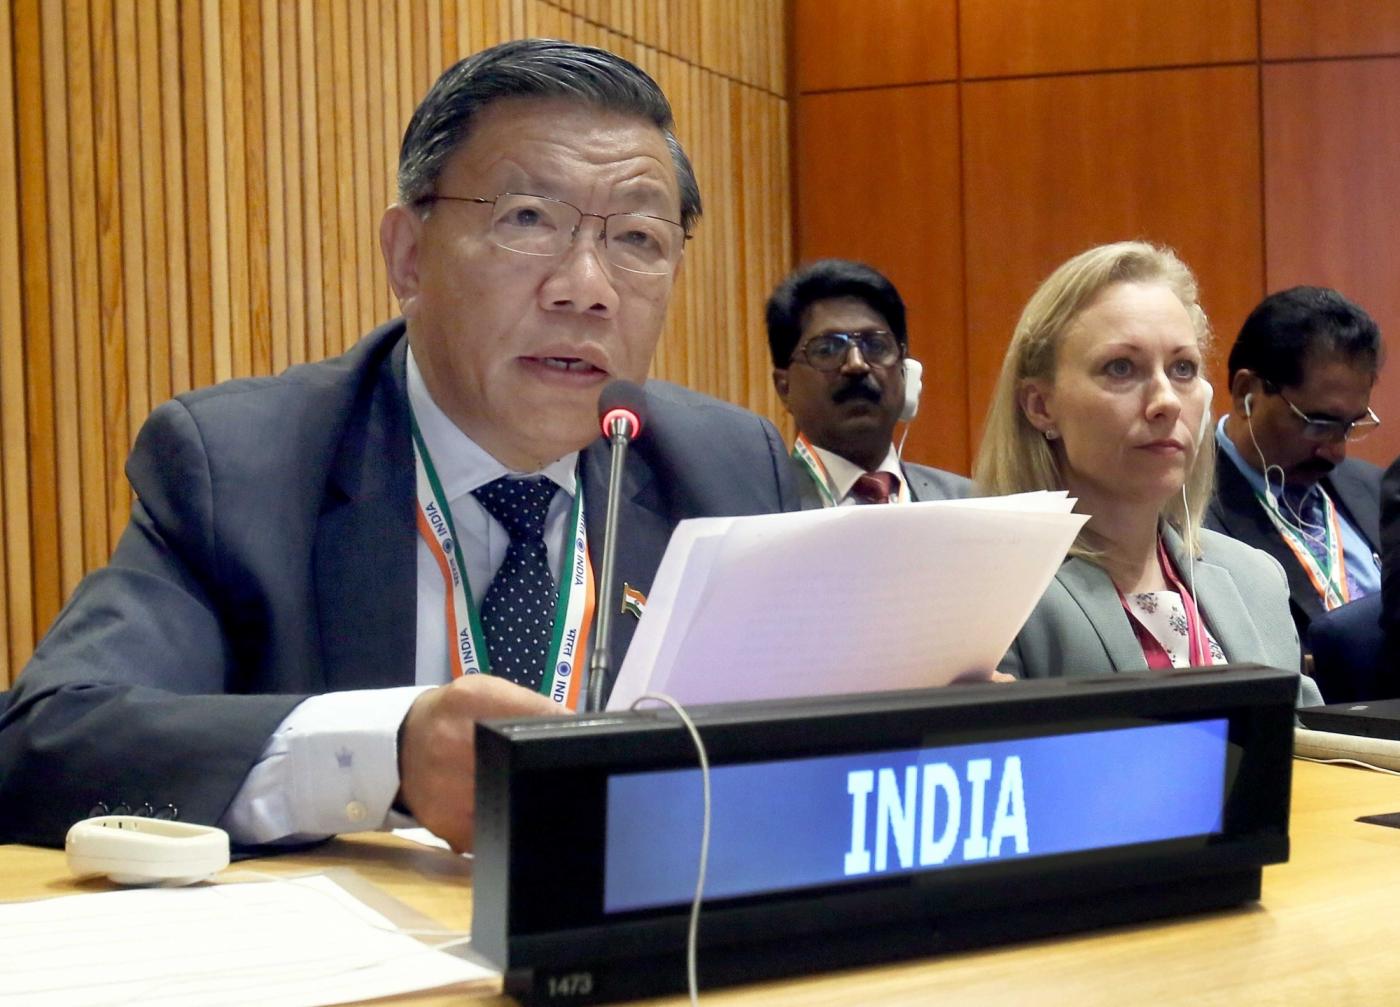 New York: Prem Das Rai, Member of the Parliament (Sikkim), at the Sixth Committee meeting on Agenda Item 86 "The Rule of Law at the National and International Levels" at the United Nations on October 7, 2018. (Photo: IANS) by .